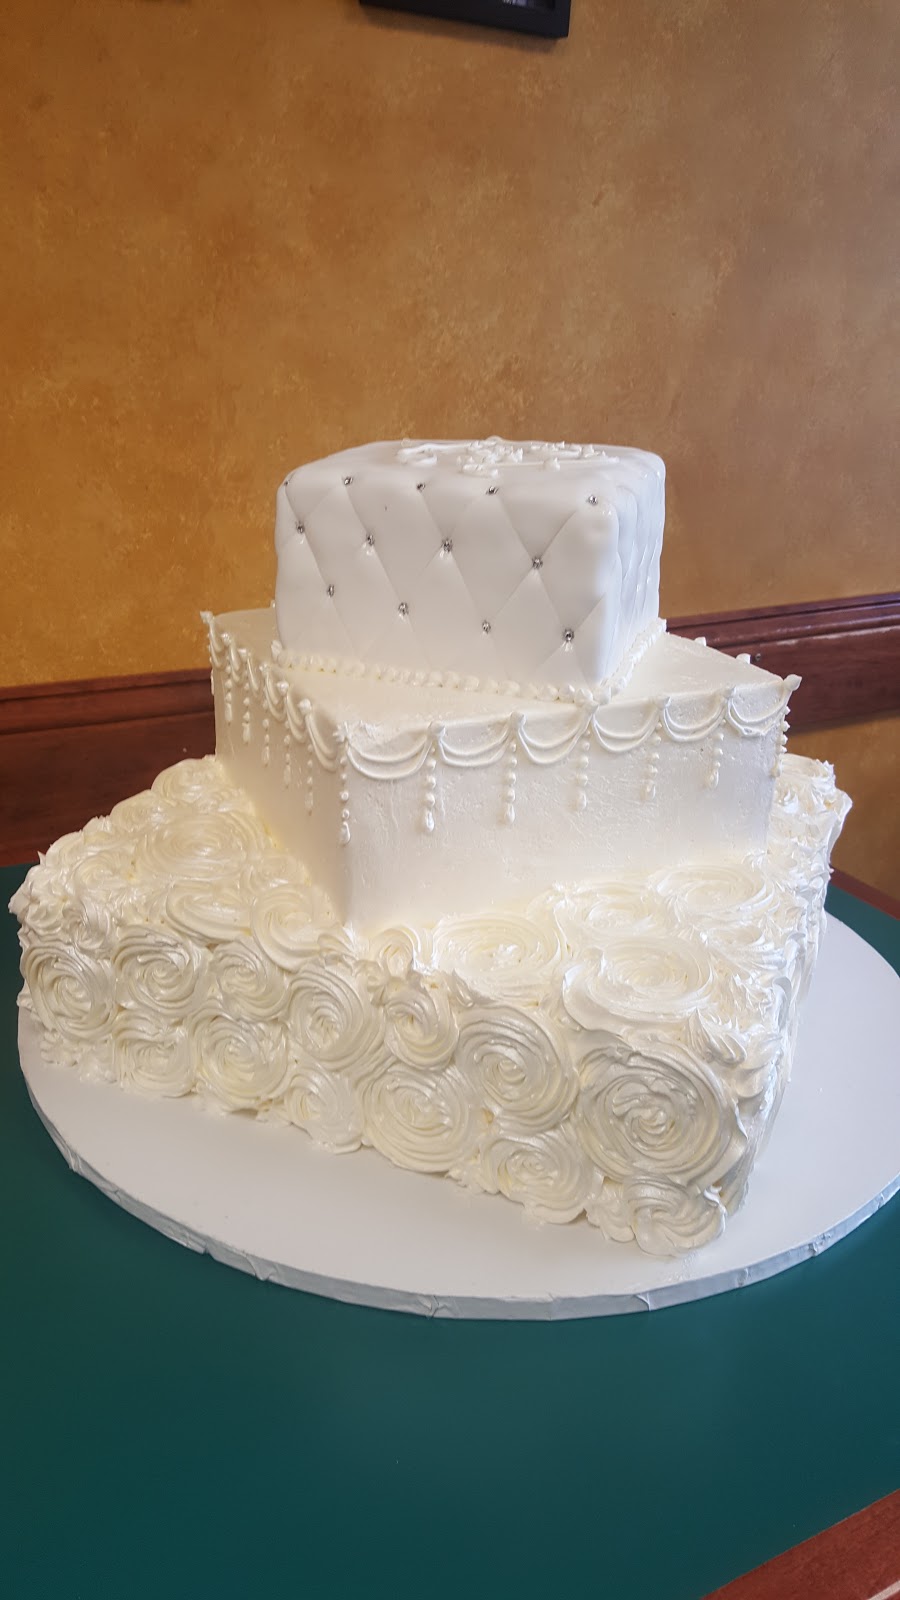 Milani Italian Pastry & Bakery | 855 Forest Rd #4409, Northford, CT 06472 | Phone: (203) 484-5017